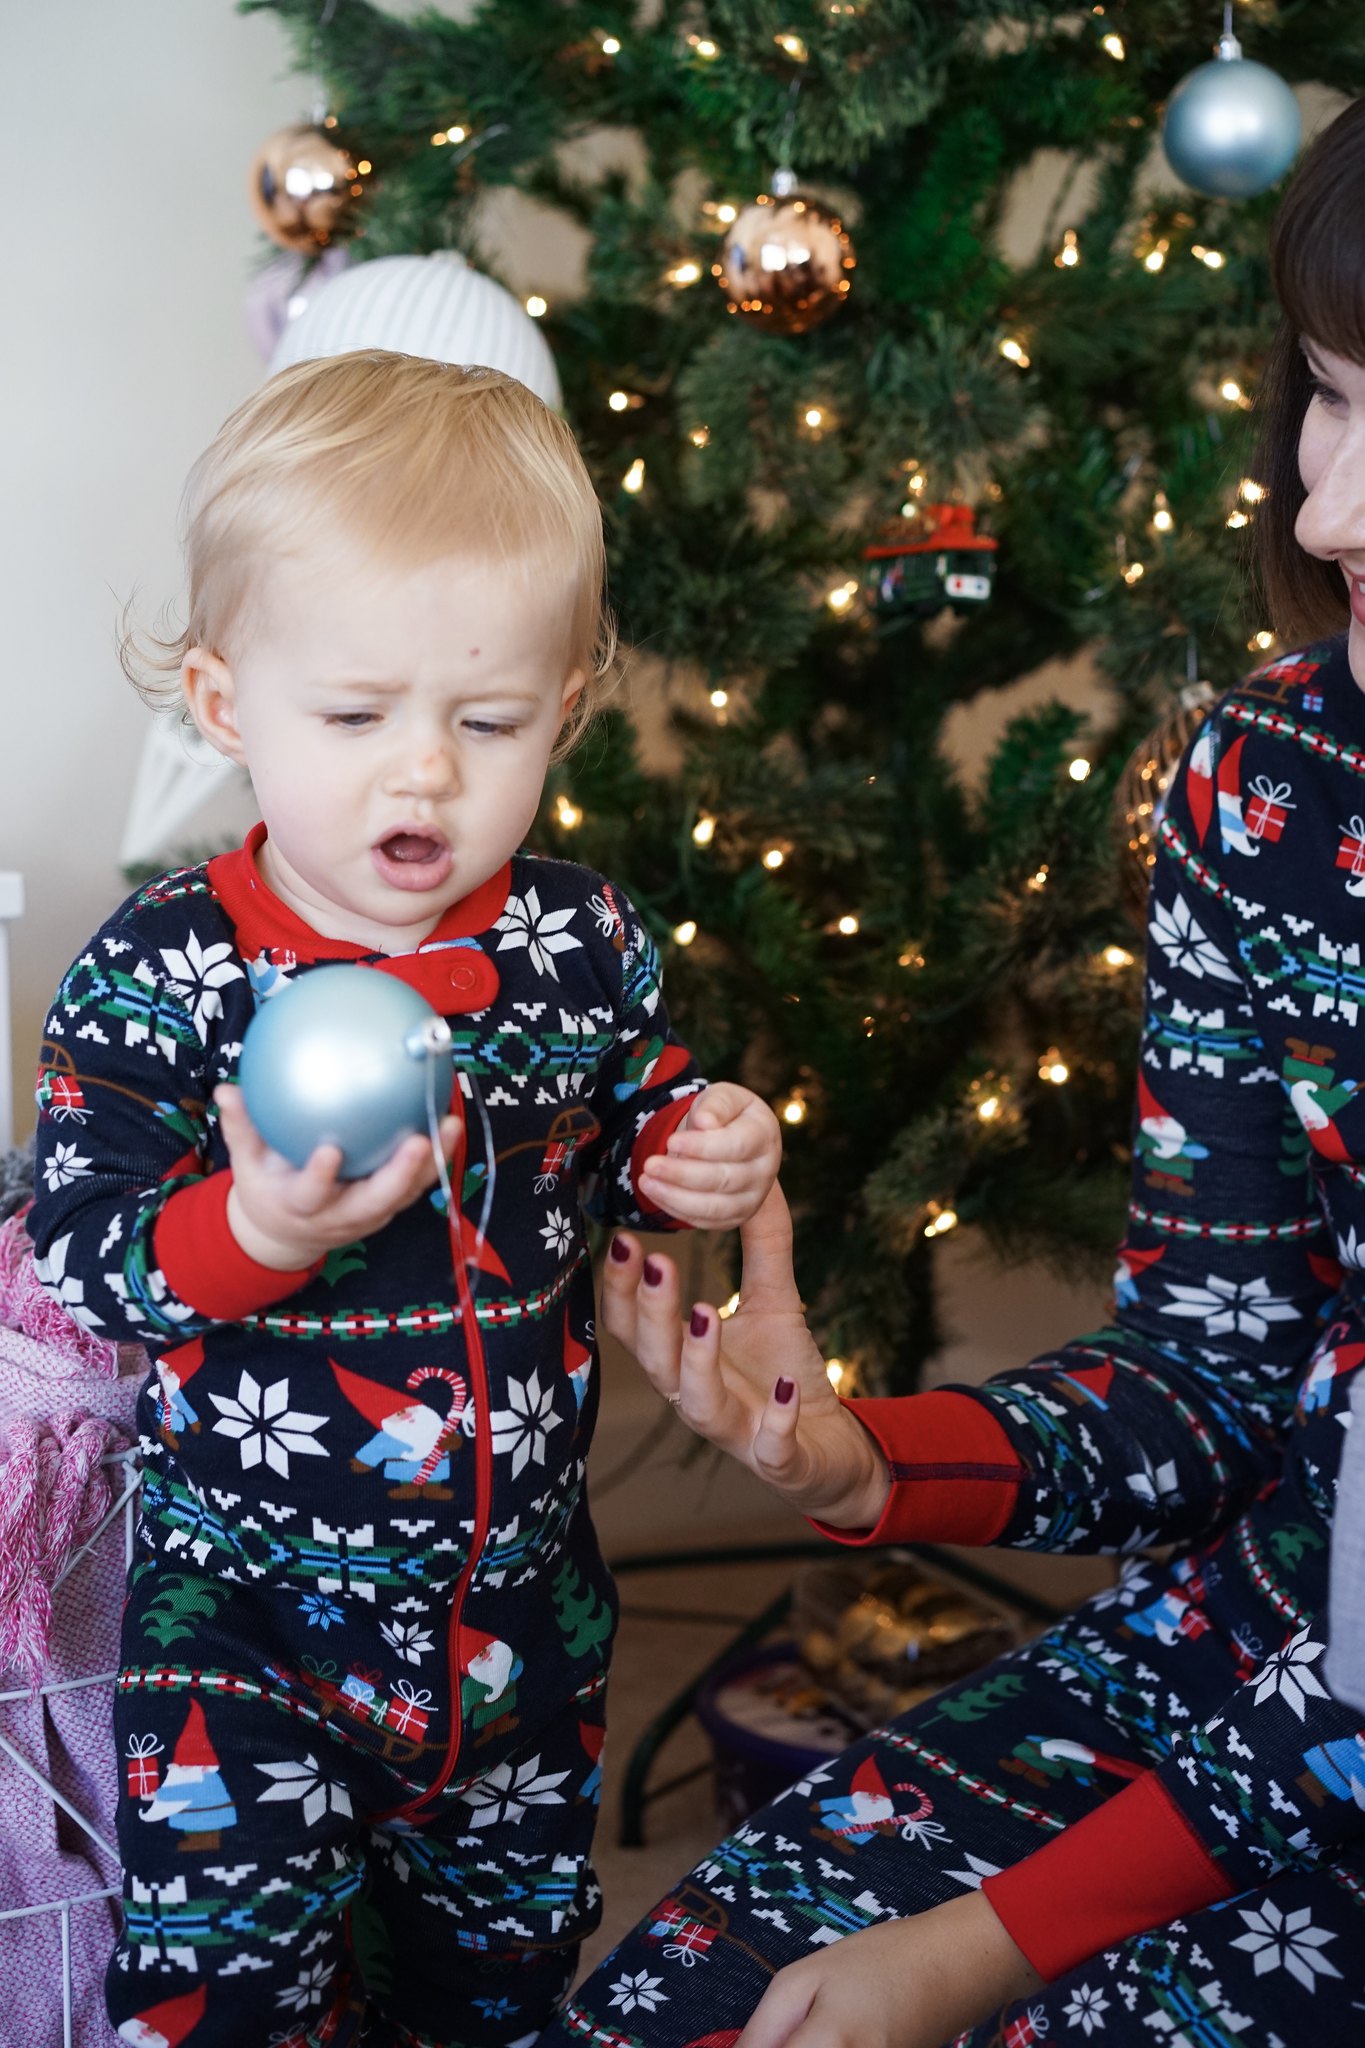 Hanna Andersson, Matching pjs, mommy and me style, Christmas traditions, mom life, mommy blog, fbloggers, hannajams